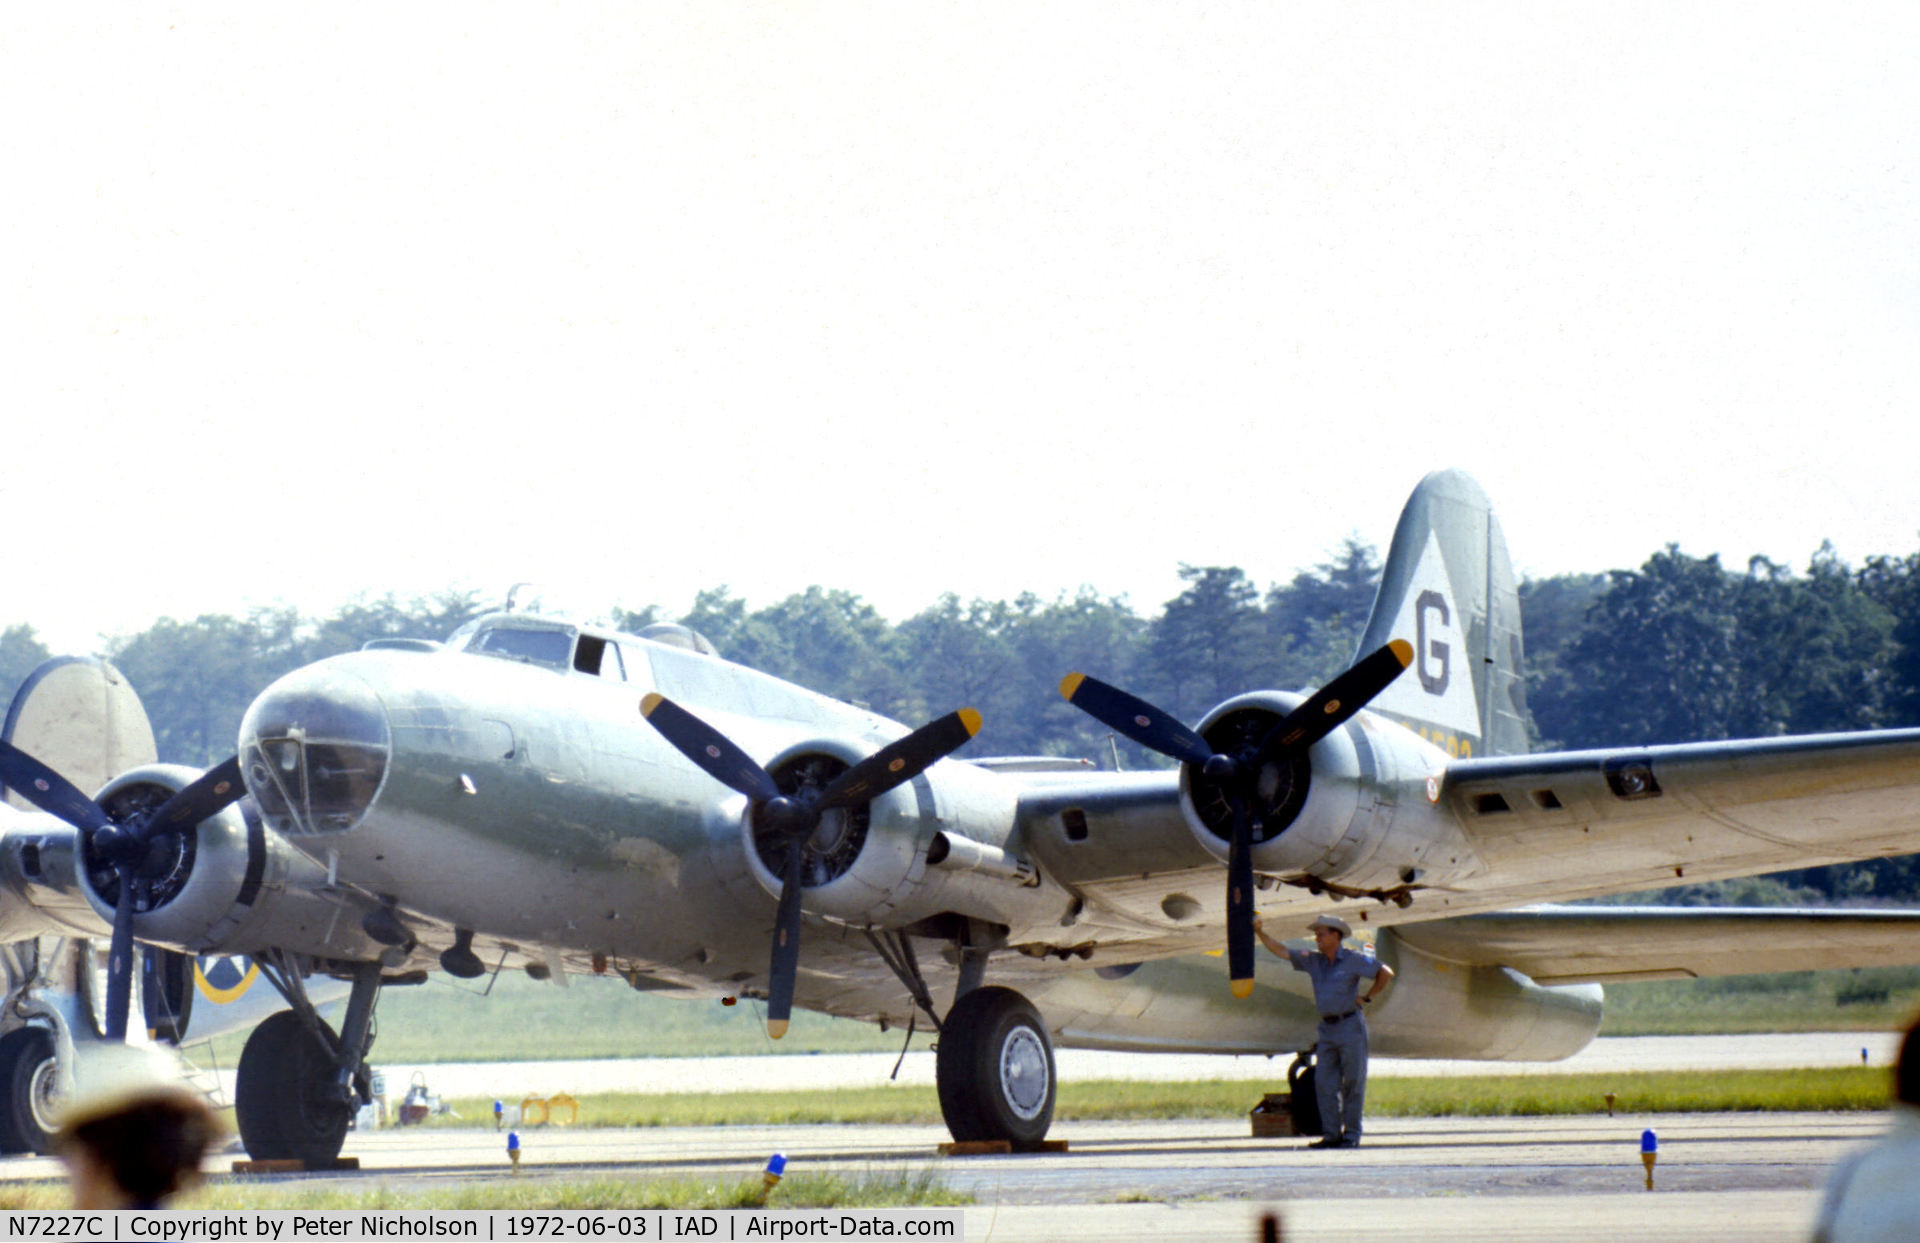 N7227C, 1944 Boeing B-17G Fortress C/N 32513, B-17G Flying Fortress, later known as Texas Raiders, of the Confederate Air Force which was present at Transpo 72 at Dulles Intnl Airport in June 1972.